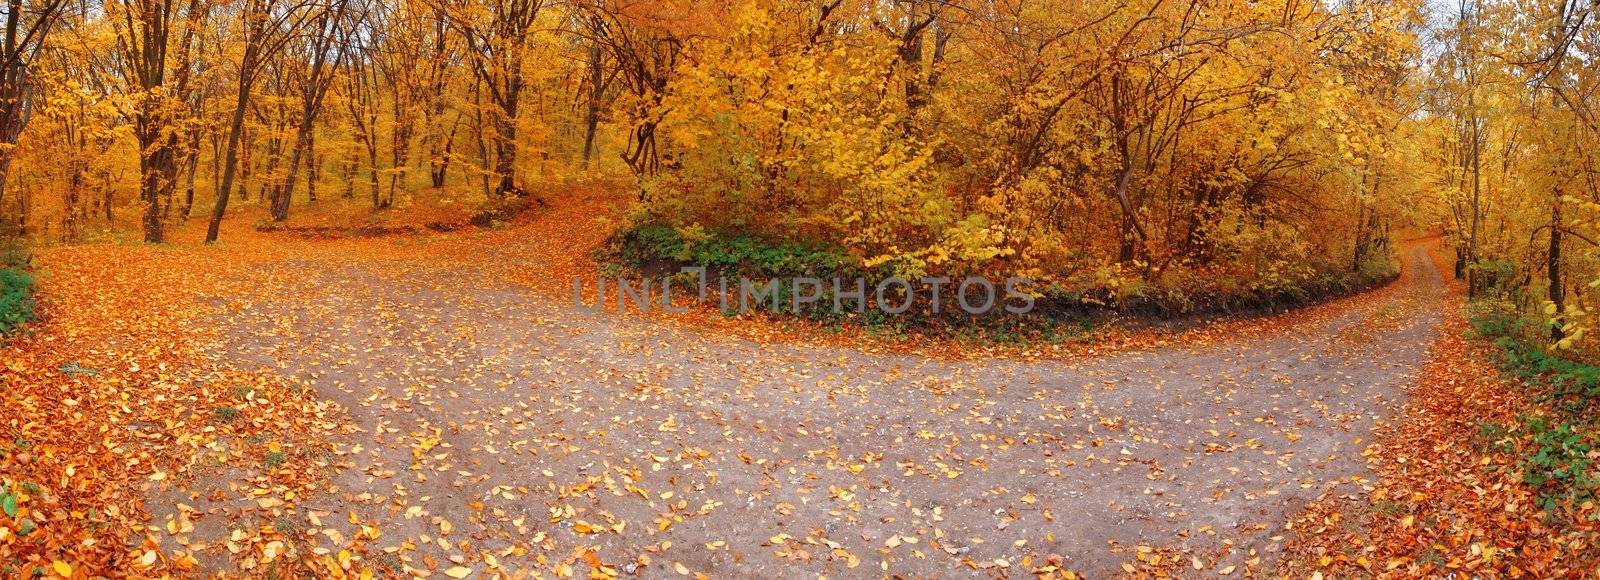 A panoramic image of road in autumn forest